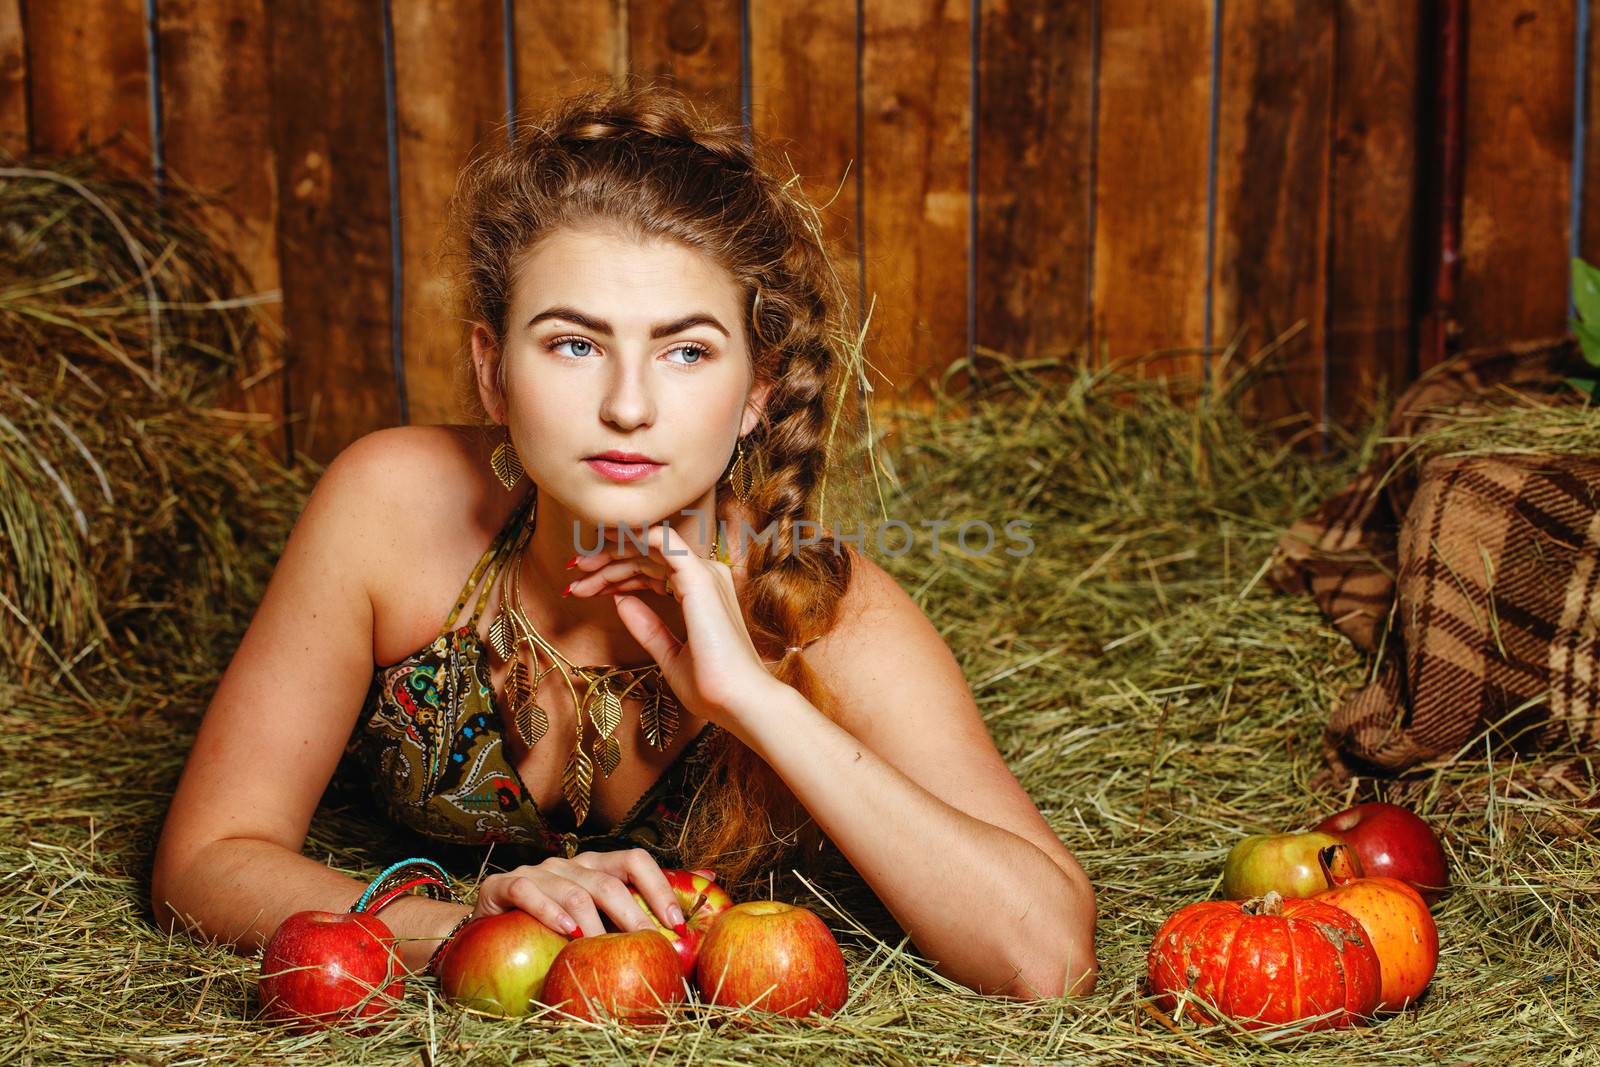 Attractive young rural girl in the hayloft after harvest festival